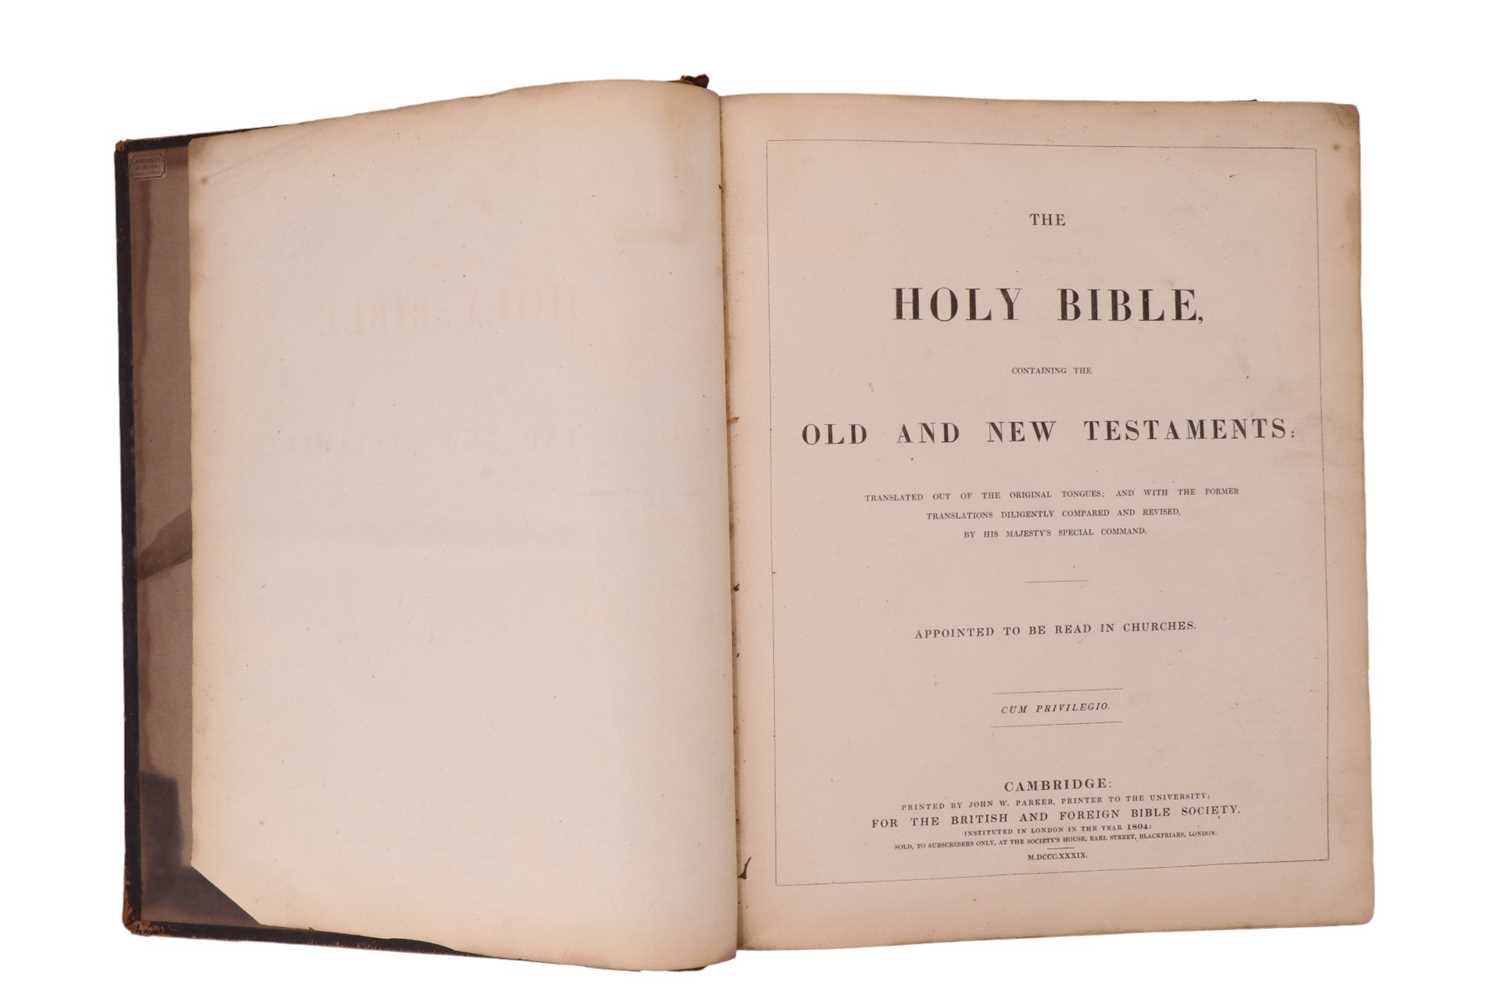 A Victorian, leather-bound Bible, Cambridge, John W Parker, 1839 - Image 2 of 3